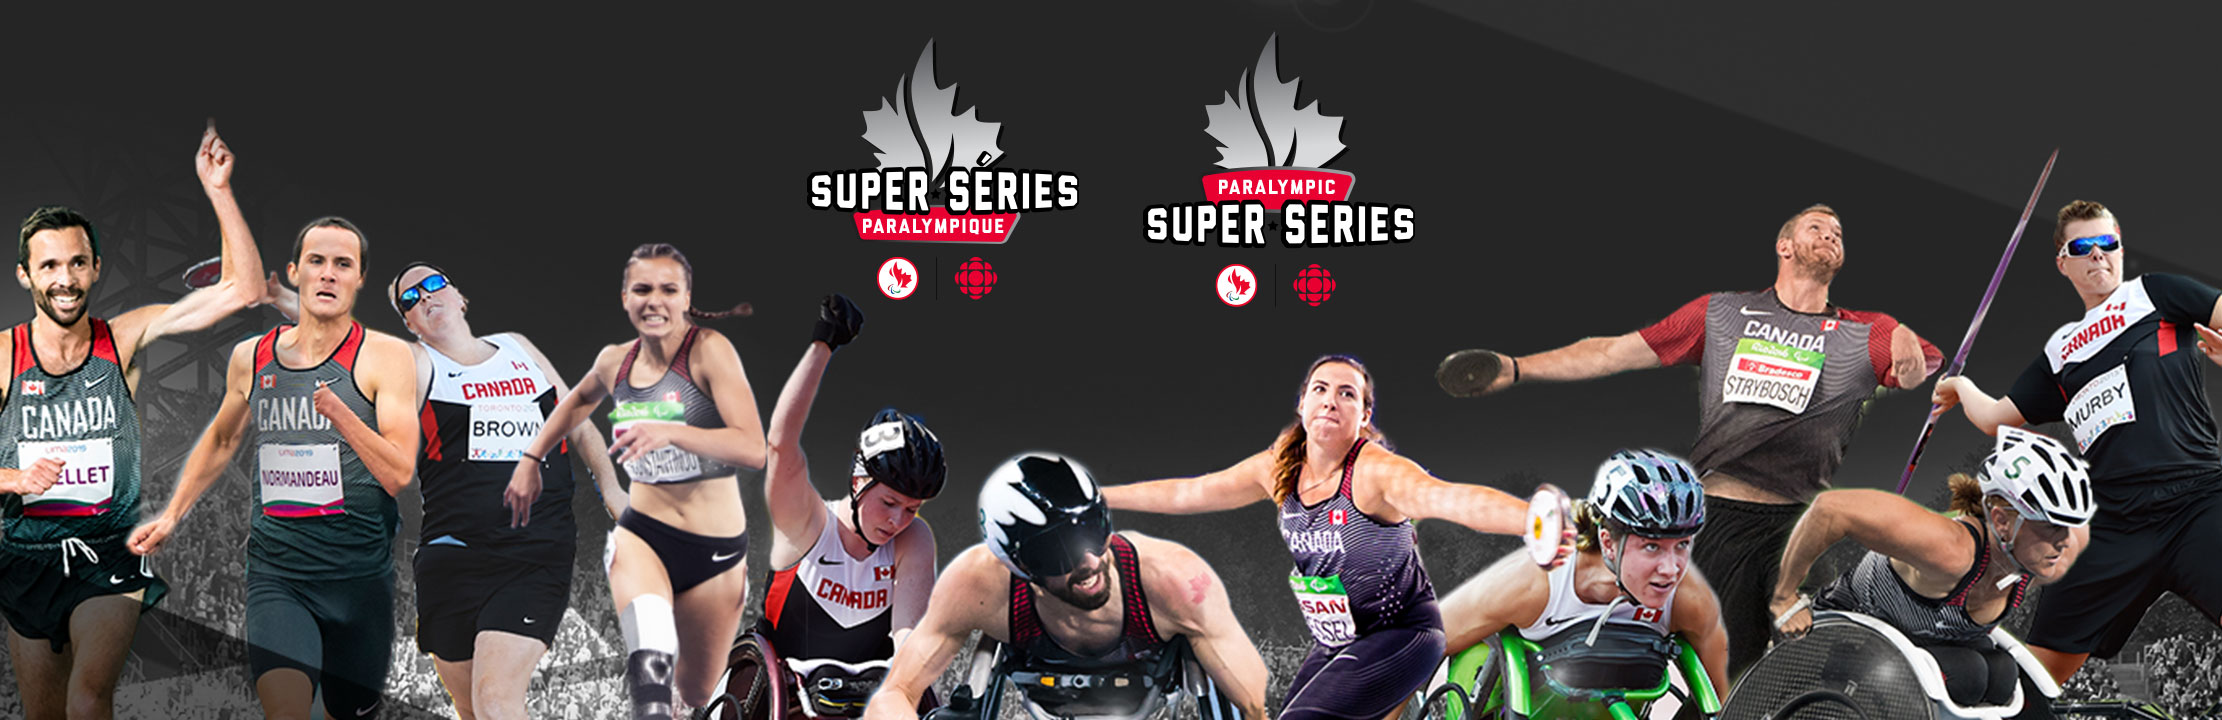 Canadian Paralympic Committee and CBC/Radio-Canada to offer streaming coverage of World Para Athletics Championships in Dubai